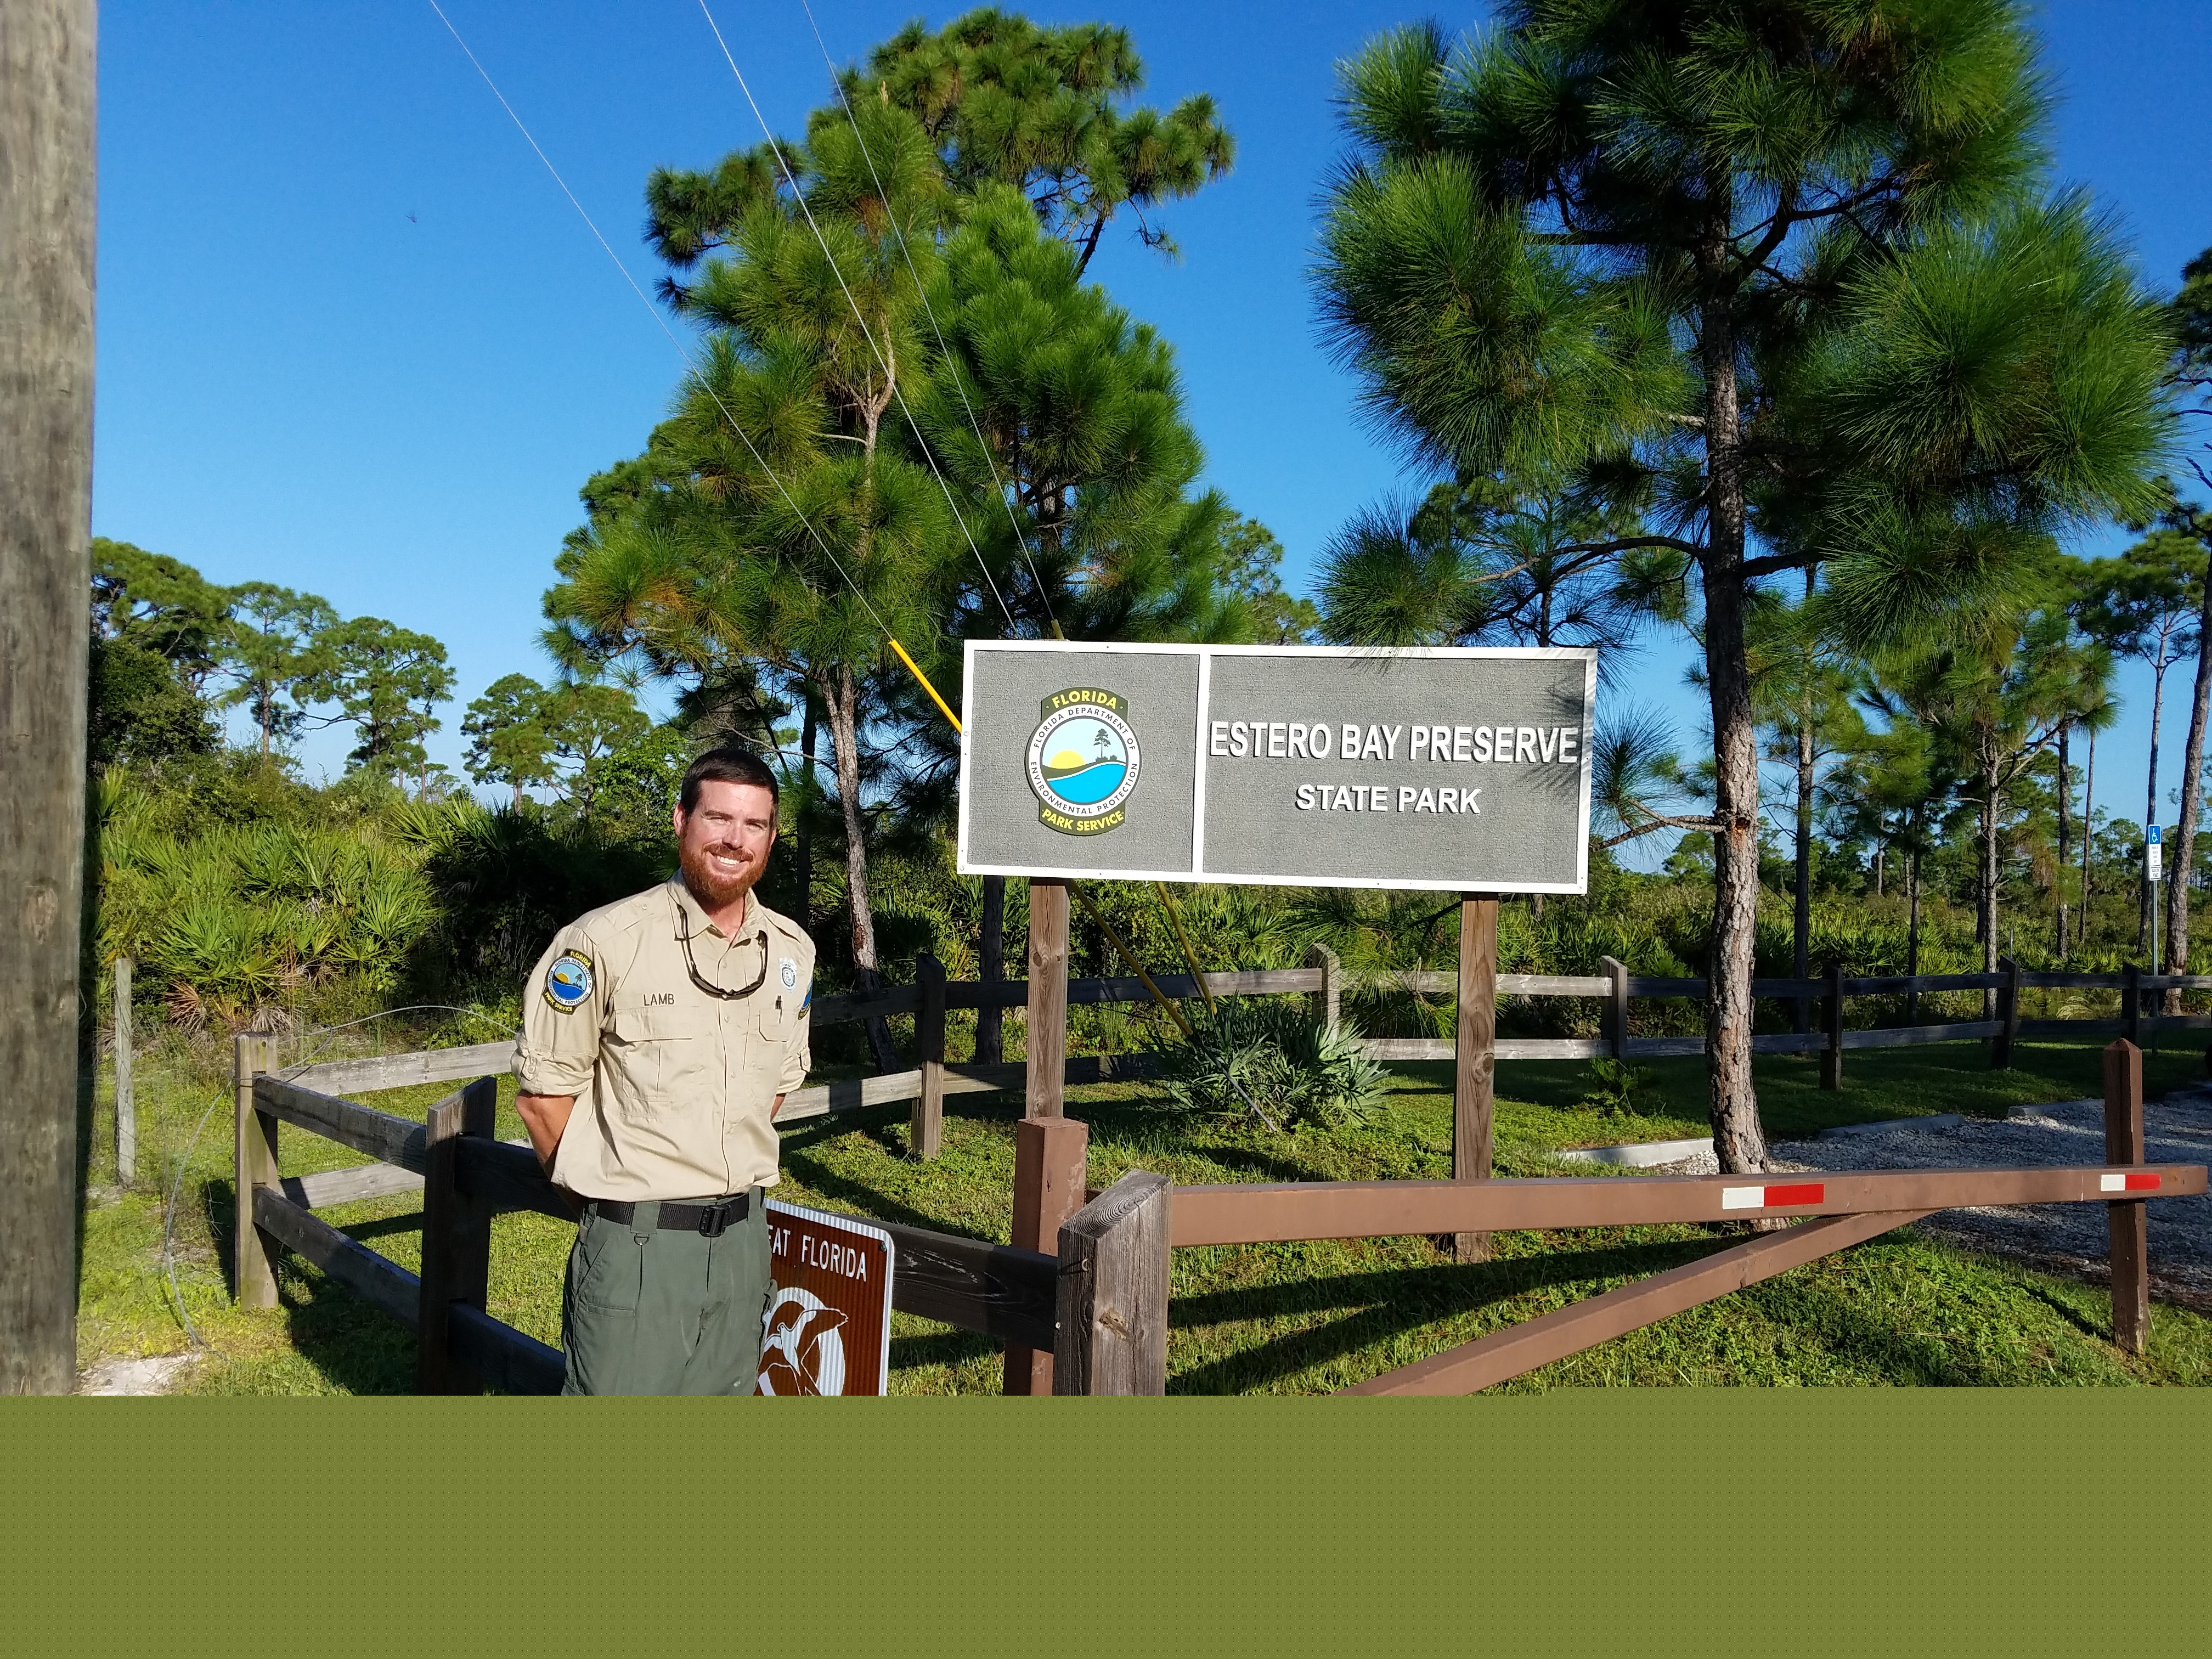 Justin Lamb poses with the park sign at Estero Bay Preserve State Park.